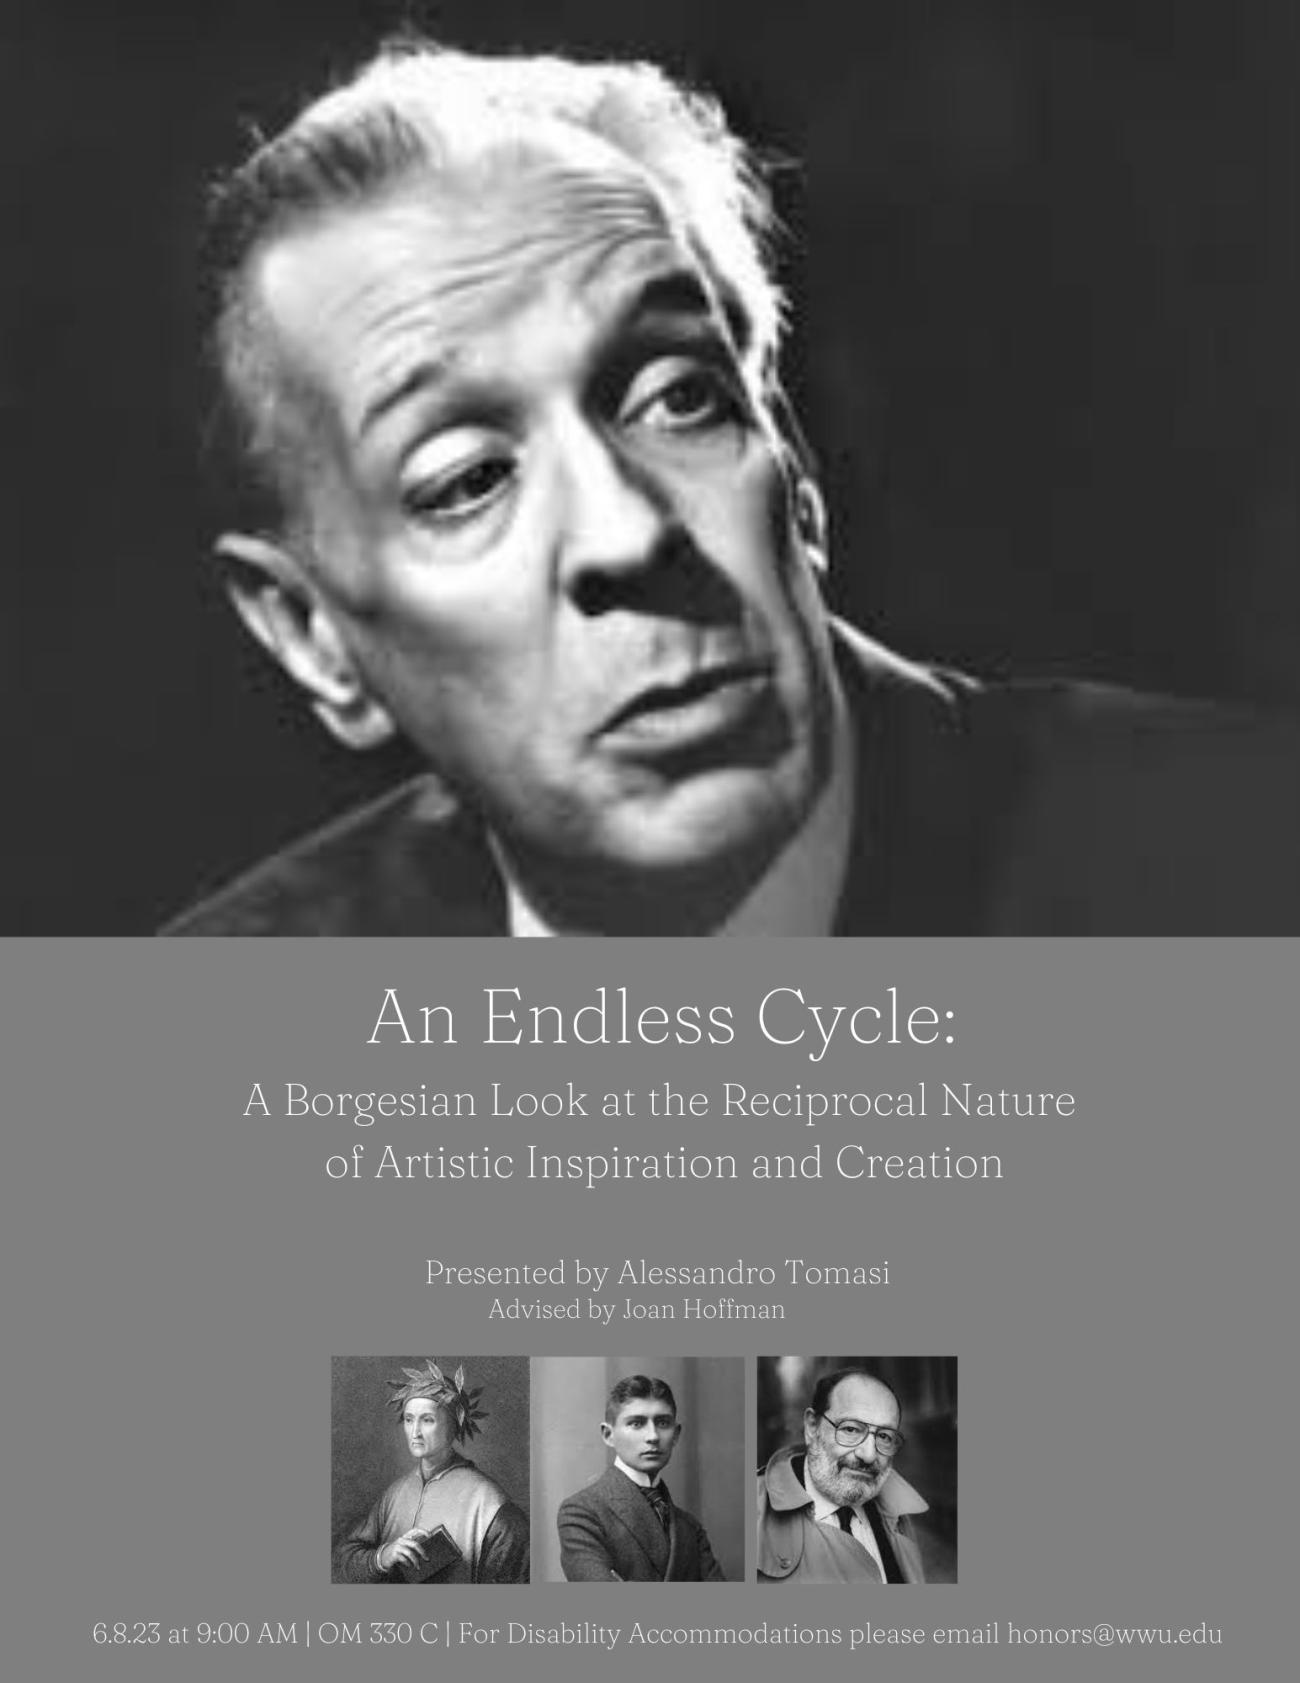 A poster with a black and white photograph of Jorge Luis Borges in the top half. The bottom half of the poster has a dark grey background. On the bottom, there are photos of Dante Alighieri, Franz Kafka and Umberto Eco. The text reads: "An Endless Cycle: A Borgesian Look at the Reciprocal Nature of Artistic Inspiration and Creation. Presented by Alessandro Tomasi, Advised by Joan Hoffman. 6.8.23 at 9:00 AM, OM 331, For Disability Accommodations please email honors@wwu.edu". 